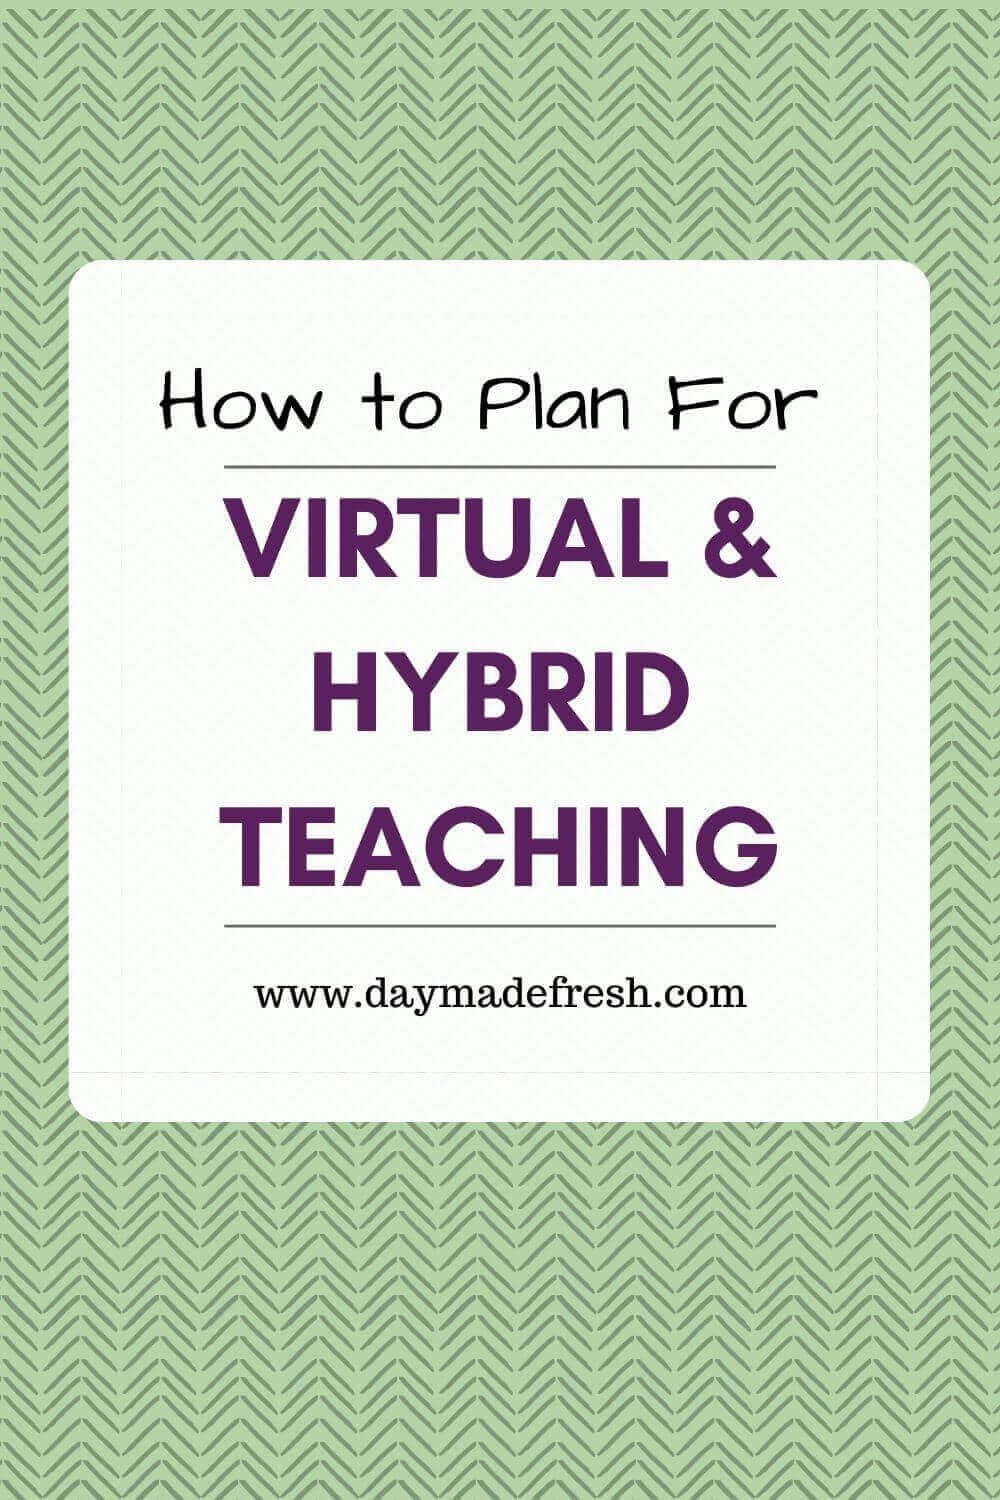 Image Text: How to Plan for Virtual & Hybrid Teaching on white square on a green patterned background